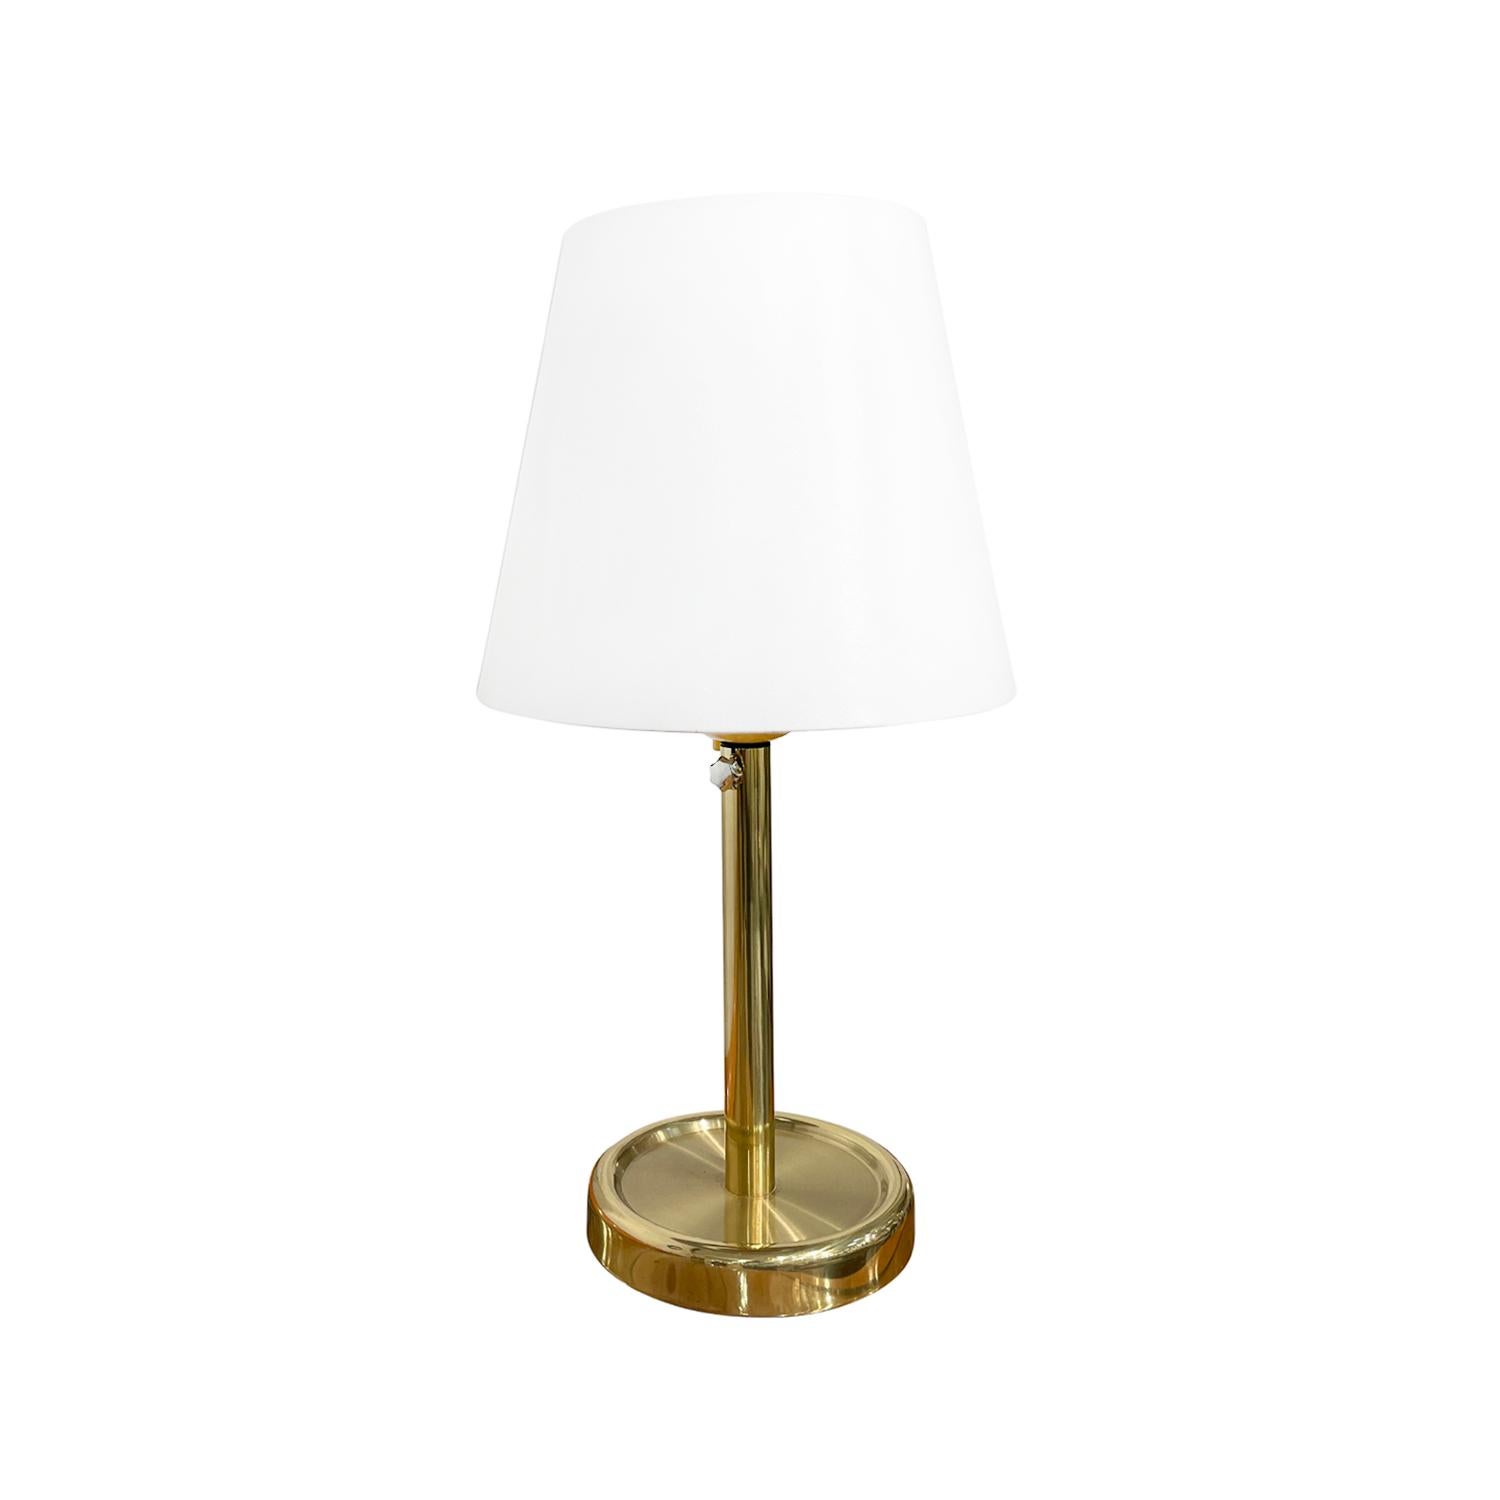 Mid-Century Modern 20th Century Swedish Polished Brass Lamp - Desk Light by Fagerhults Belysning For Sale